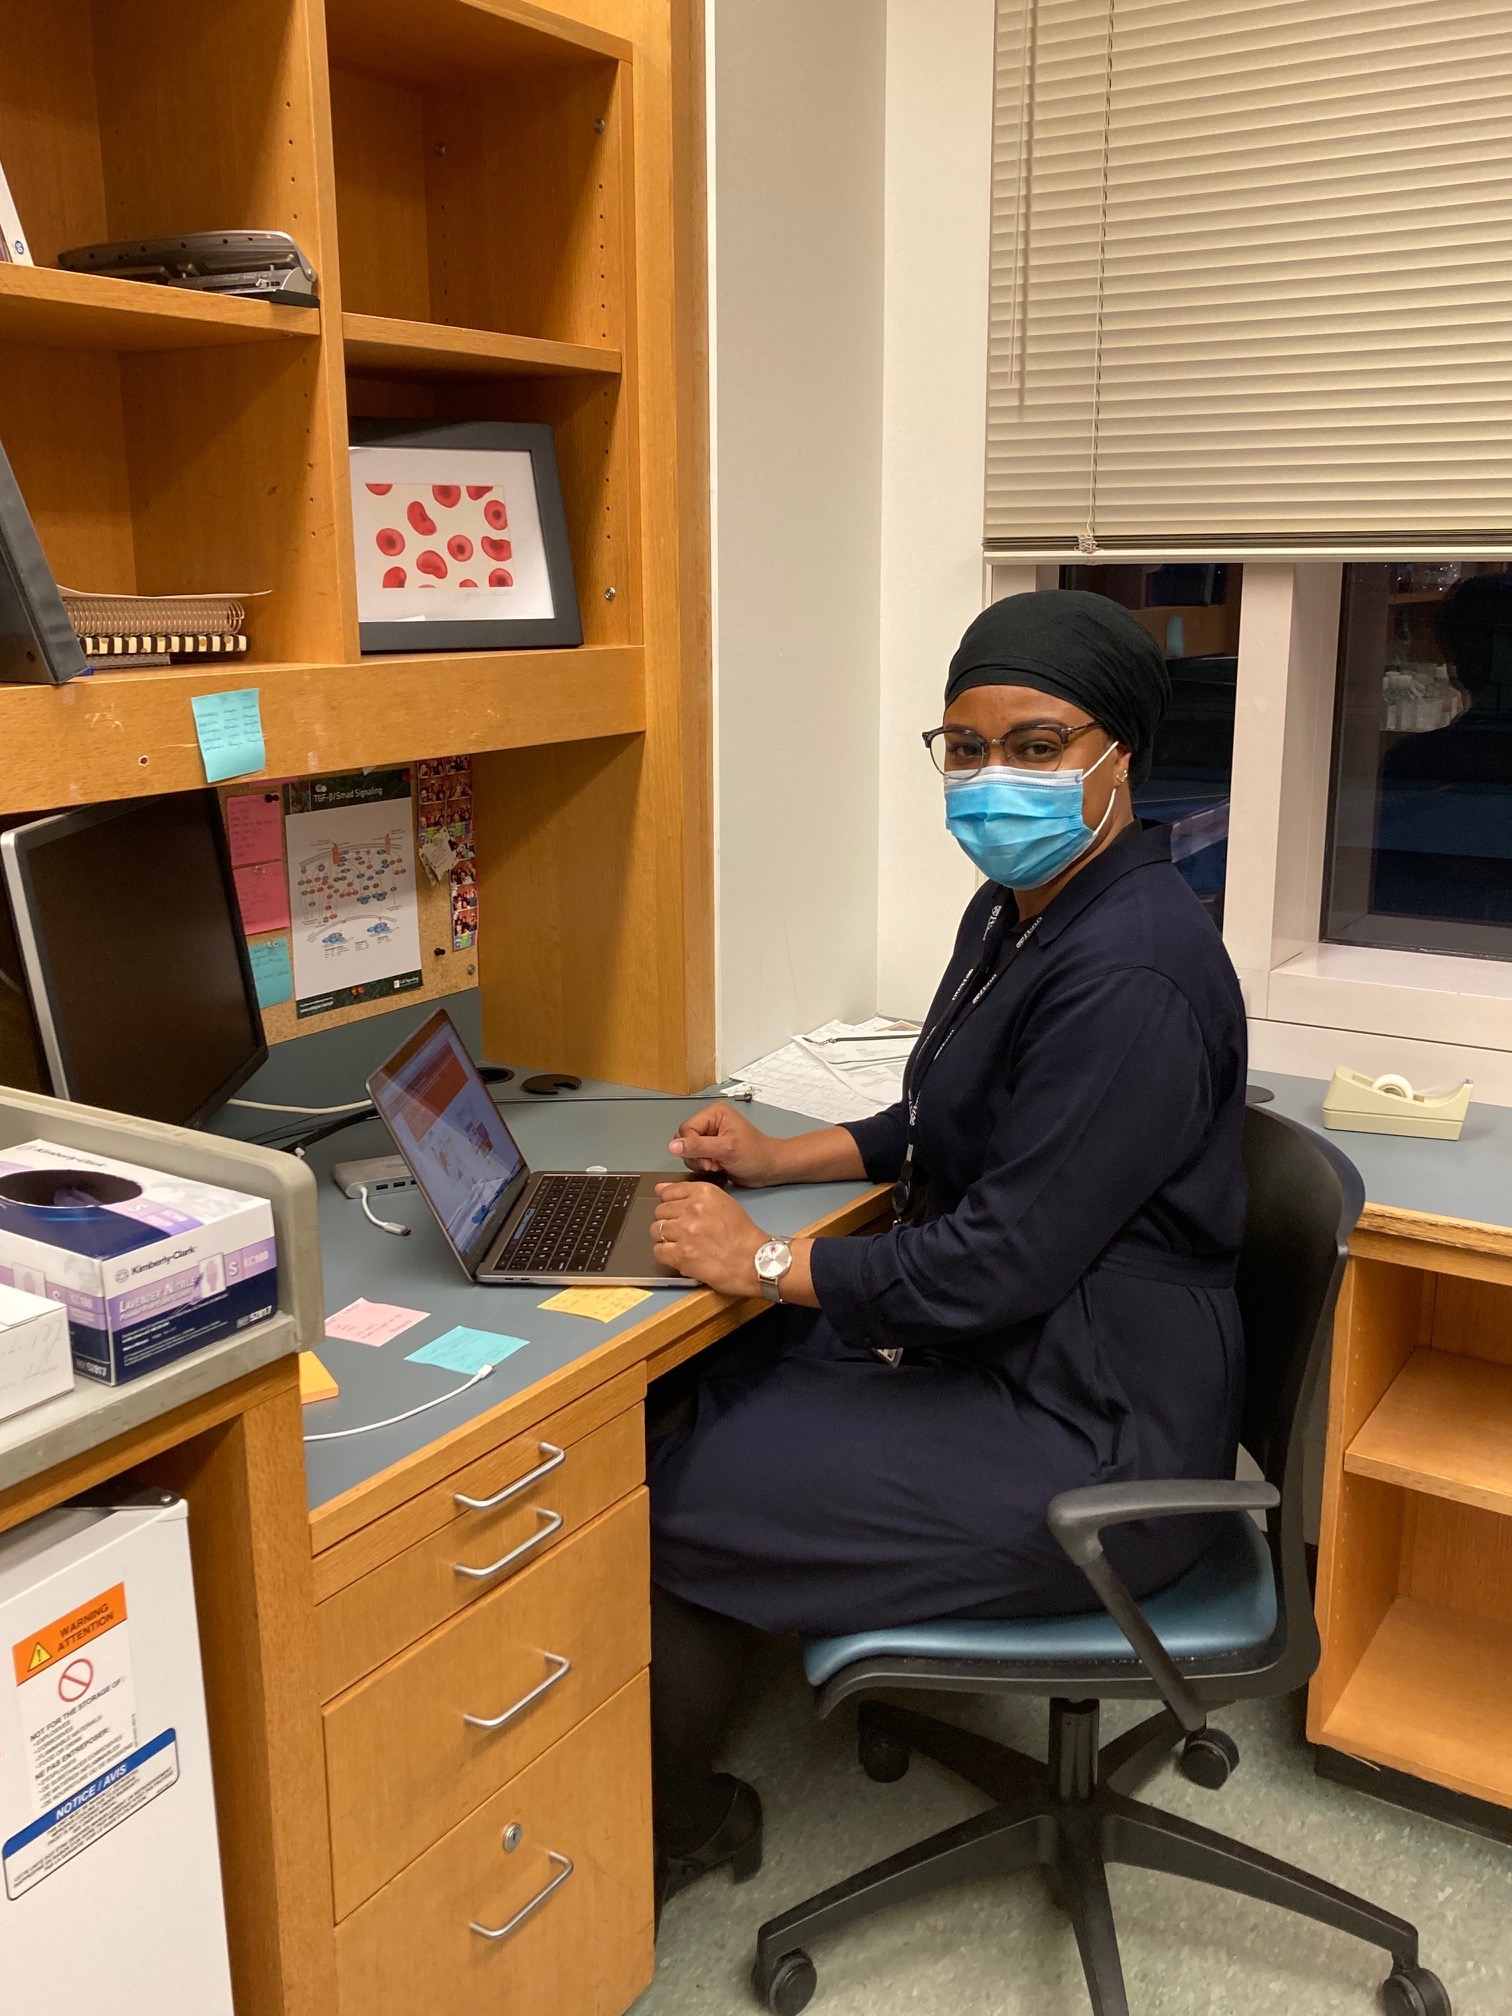 PHOTO: Suean Fontenard is a participant in Moderna's COVID-19 clinical trial and a postdoctoral researcher at the University of Pennsylvania. She said she's on a "mission" to encourage people in her community to trust the vaccine if it's proven to work.